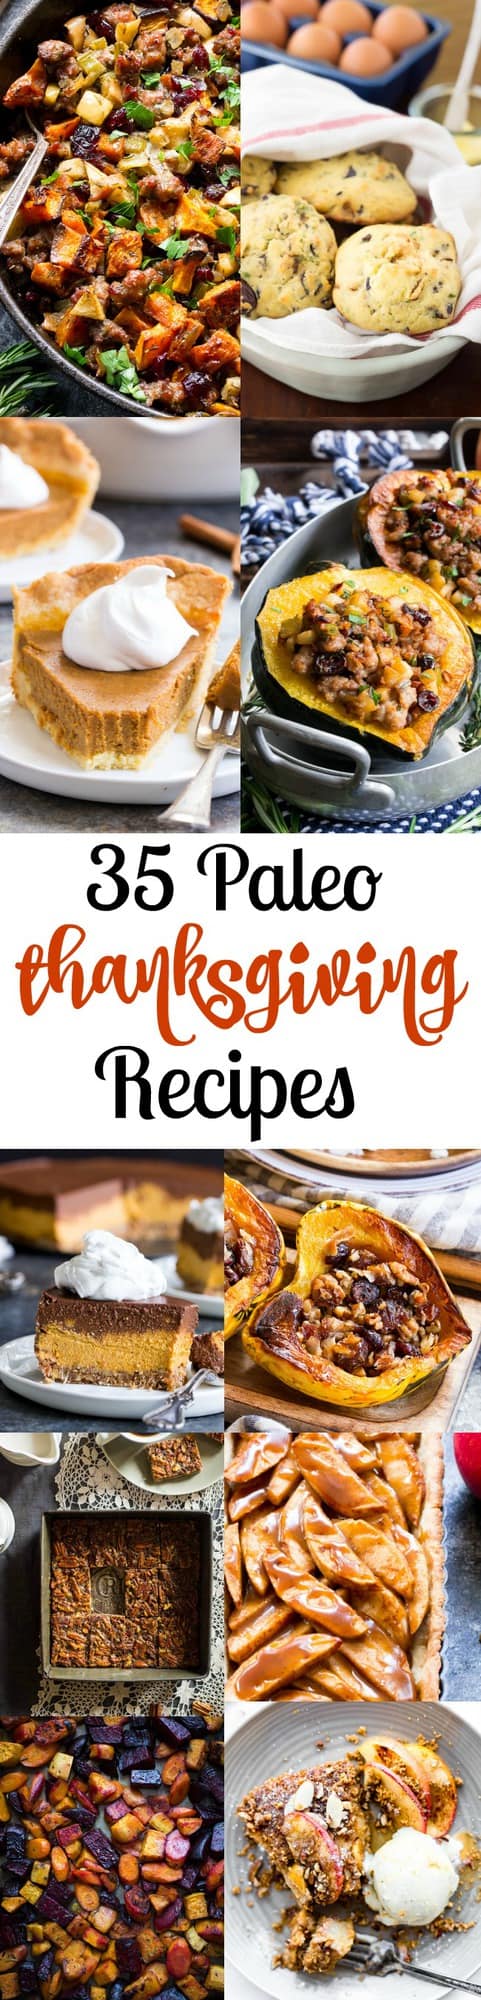 It's time to get ready for Thanksgiving!  Whether you're hosting a big group or just bringing along a favorite dish, these 35 delicious Paleo Thanksgiving recipes will inspire you to get cooking.   A mix of appetizers/snacks, main dishes, side dishes and desserts mean your Paleo Thanksgiving is totally covered!